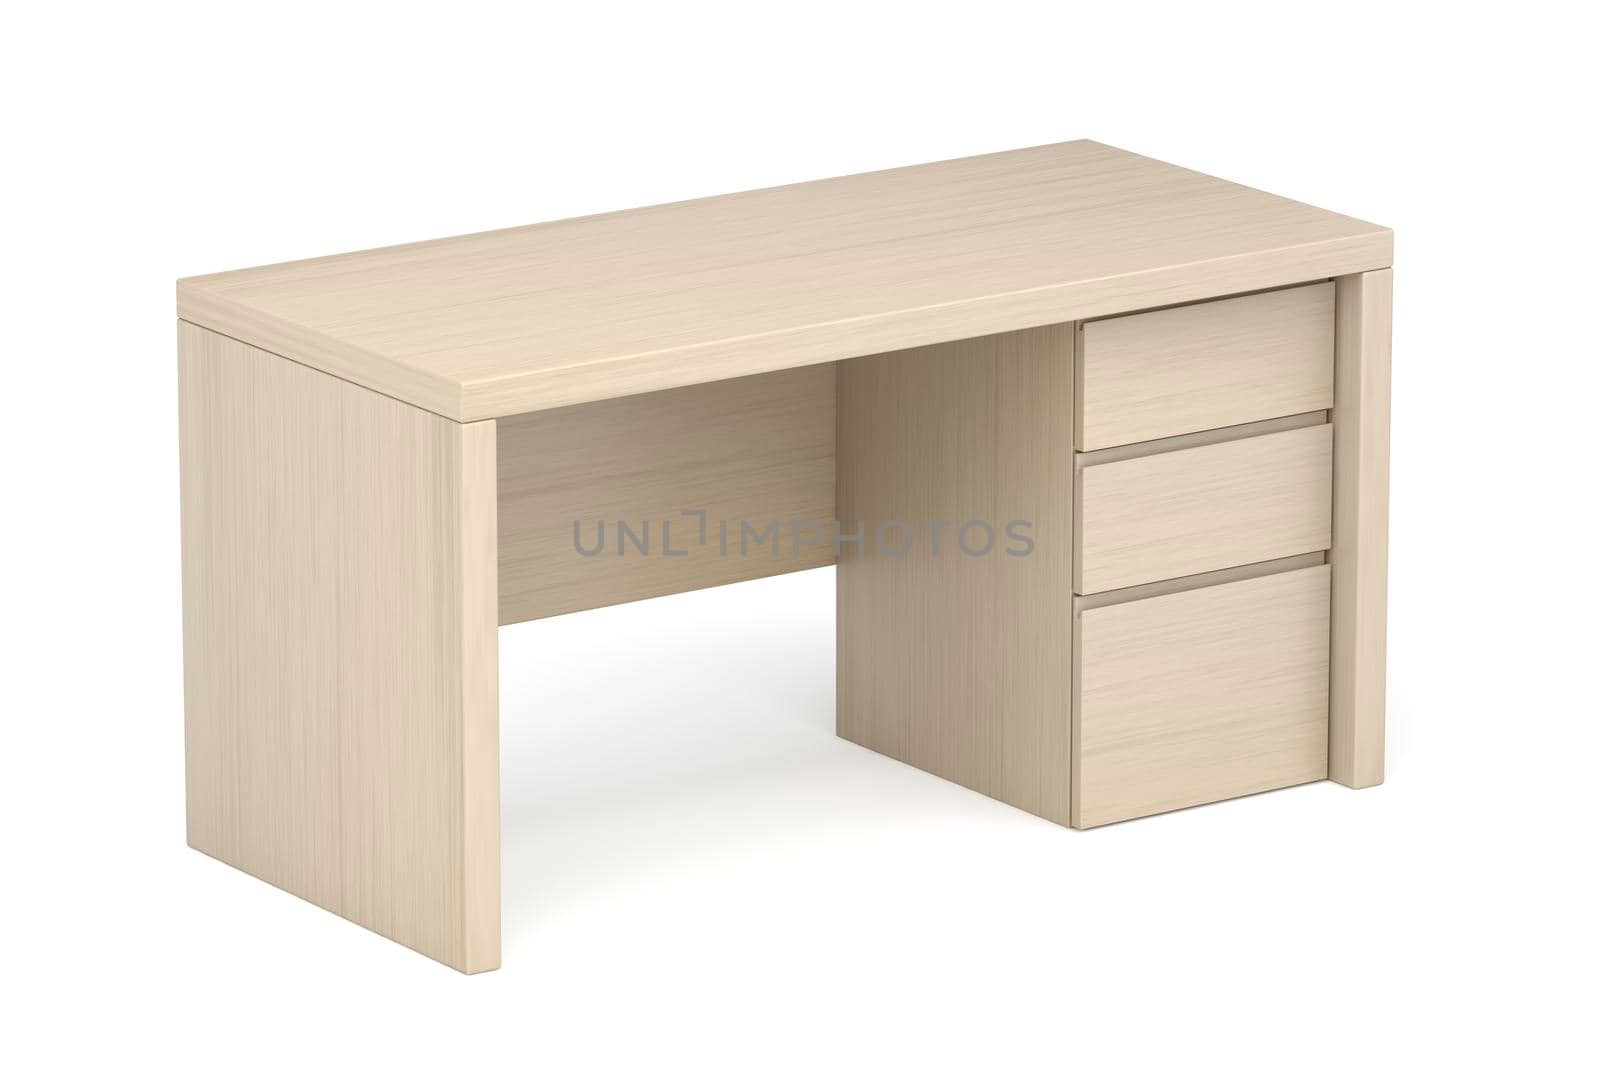 Wooden desk with drawers by magraphics